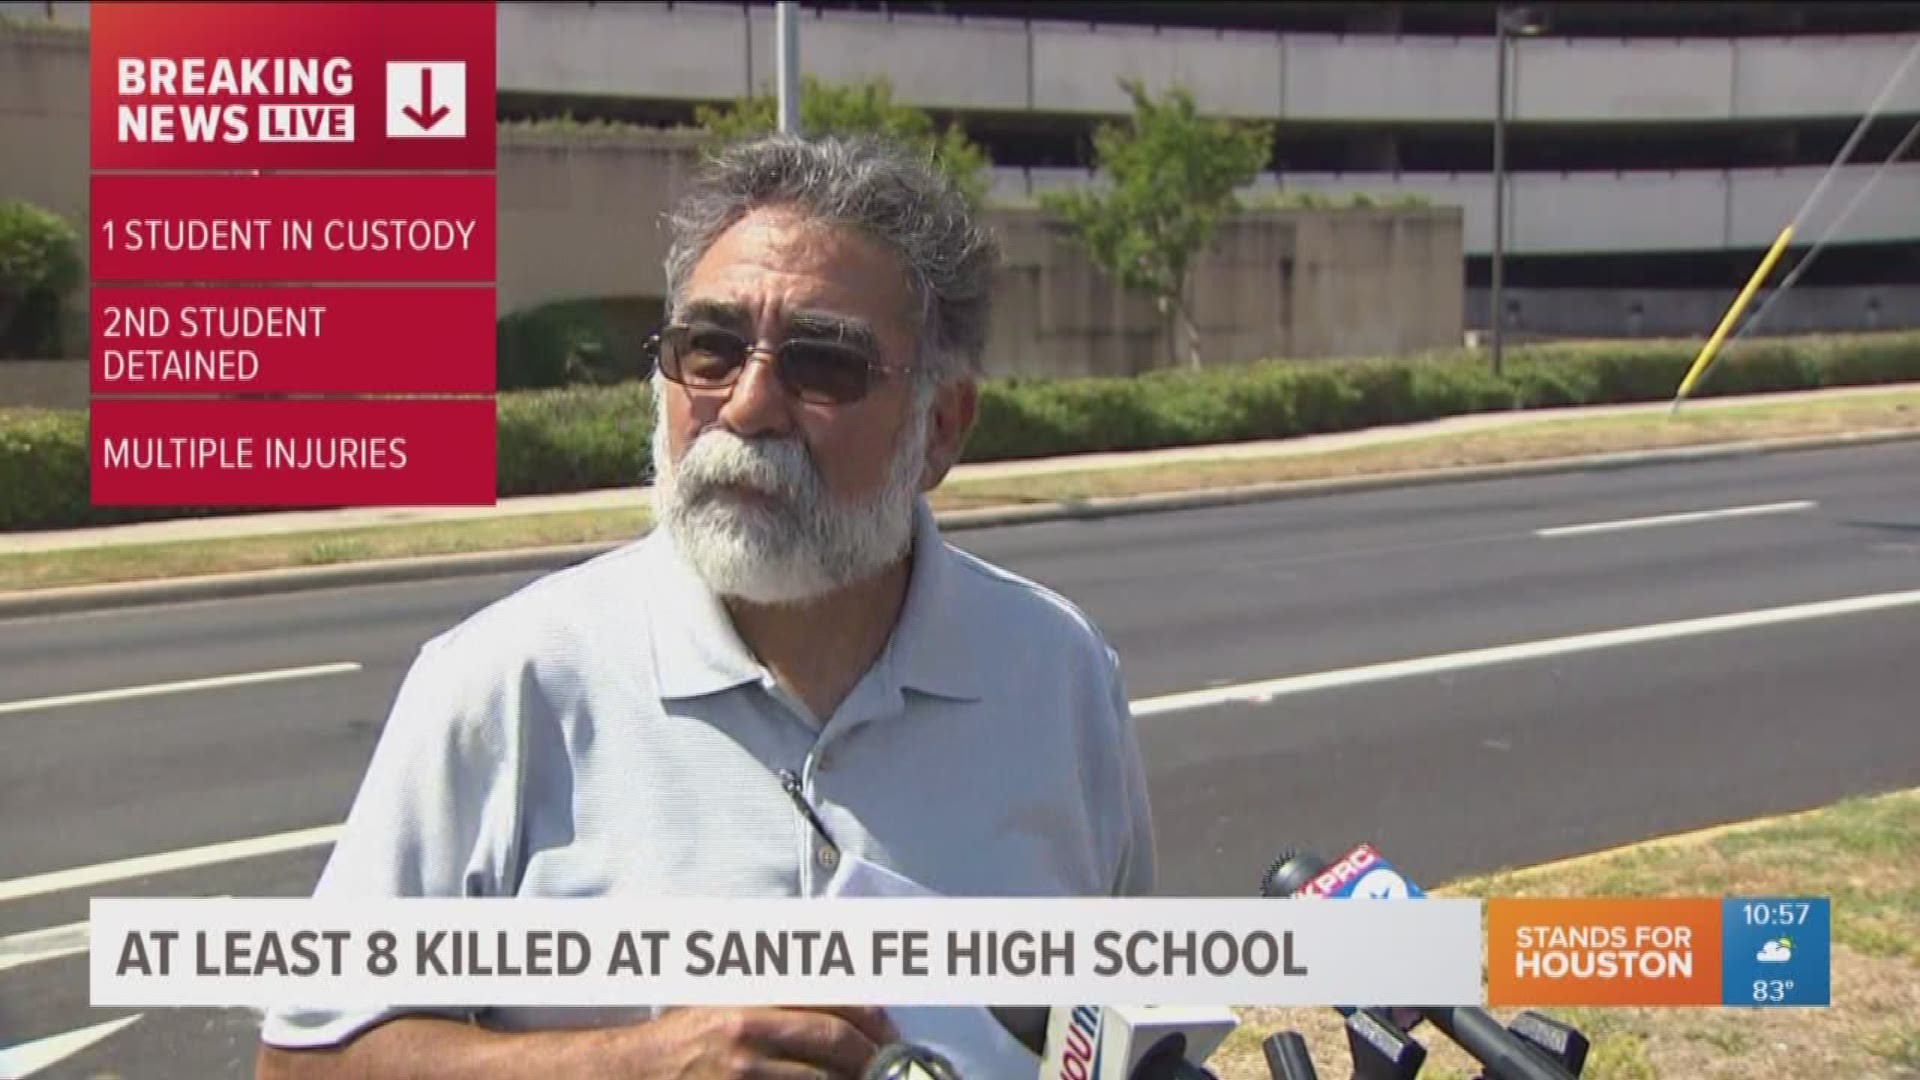 A spokesperson for the University of Texas Medical Branch says two victims of the Santa Fe High School shooting are recovering after being shot in the leg. Another going into surgery for wounds to the chest.